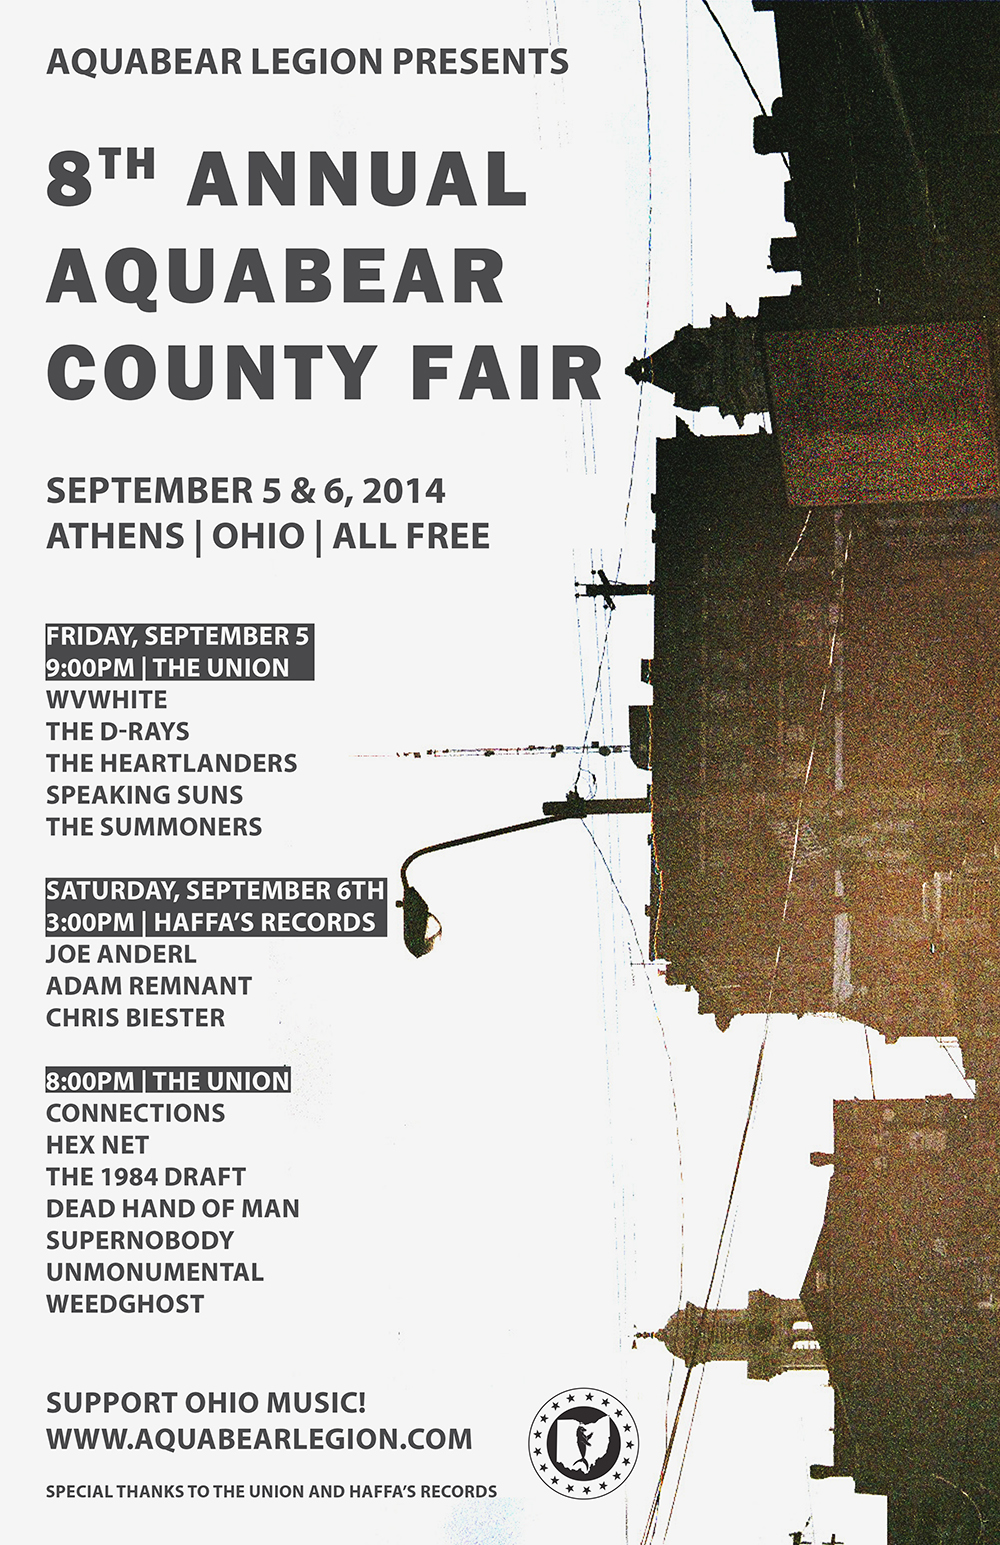 8th Annual Aquabear County Fair is September 5-6: 15 Ohio Bands, 2 Days, ALL FREE